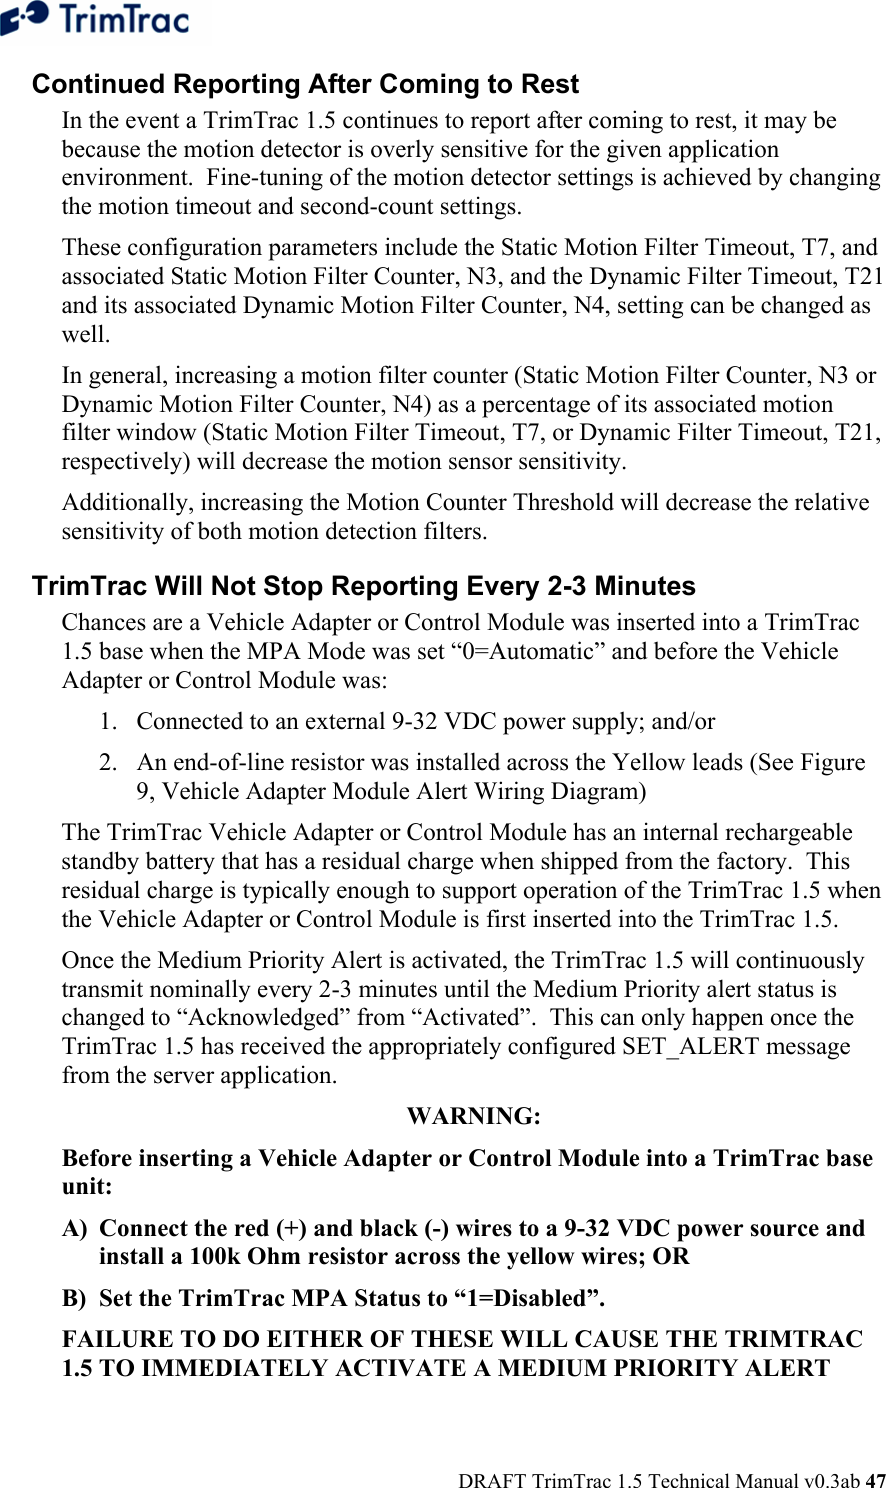  DRAFT TrimTrac 1.5 Technical Manual v0.3ab 47 Continued Reporting After Coming to Rest  In the event a TrimTrac 1.5 continues to report after coming to rest, it may be because the motion detector is overly sensitive for the given application environment.  Fine-tuning of the motion detector settings is achieved by changing the motion timeout and second-count settings.   These configuration parameters include the Static Motion Filter Timeout, T7, and associated Static Motion Filter Counter, N3, and the Dynamic Filter Timeout, T21 and its associated Dynamic Motion Filter Counter, N4, setting can be changed as well. In general, increasing a motion filter counter (Static Motion Filter Counter, N3 or Dynamic Motion Filter Counter, N4) as a percentage of its associated motion filter window (Static Motion Filter Timeout, T7, or Dynamic Filter Timeout, T21, respectively) will decrease the motion sensor sensitivity.  Additionally, increasing the Motion Counter Threshold will decrease the relative sensitivity of both motion detection filters. TrimTrac Will Not Stop Reporting Every 2-3 Minutes  Chances are a Vehicle Adapter or Control Module was inserted into a TrimTrac 1.5 base when the MPA Mode was set “0=Automatic” and before the Vehicle Adapter or Control Module was: 1. Connected to an external 9-32 VDC power supply; and/or  2. An end-of-line resistor was installed across the Yellow leads (See Figure 9, Vehicle Adapter Module Alert Wiring Diagram) The TrimTrac Vehicle Adapter or Control Module has an internal rechargeable standby battery that has a residual charge when shipped from the factory.  This residual charge is typically enough to support operation of the TrimTrac 1.5 when the Vehicle Adapter or Control Module is first inserted into the TrimTrac 1.5.   Once the Medium Priority Alert is activated, the TrimTrac 1.5 will continuously transmit nominally every 2-3 minutes until the Medium Priority alert status is changed to “Acknowledged” from “Activated”.  This can only happen once the TrimTrac 1.5 has received the appropriately configured SET_ALERT message from the server application. WARNING:  Before inserting a Vehicle Adapter or Control Module into a TrimTrac base unit: A) Connect the red (+) and black (-) wires to a 9-32 VDC power source and install a 100k Ohm resistor across the yellow wires; OR B) Set the TrimTrac MPA Status to “1=Disabled”. FAILURE TO DO EITHER OF THESE WILL CAUSE THE TRIMTRAC 1.5 TO IMMEDIATELY ACTIVATE A MEDIUM PRIORITY ALERT 